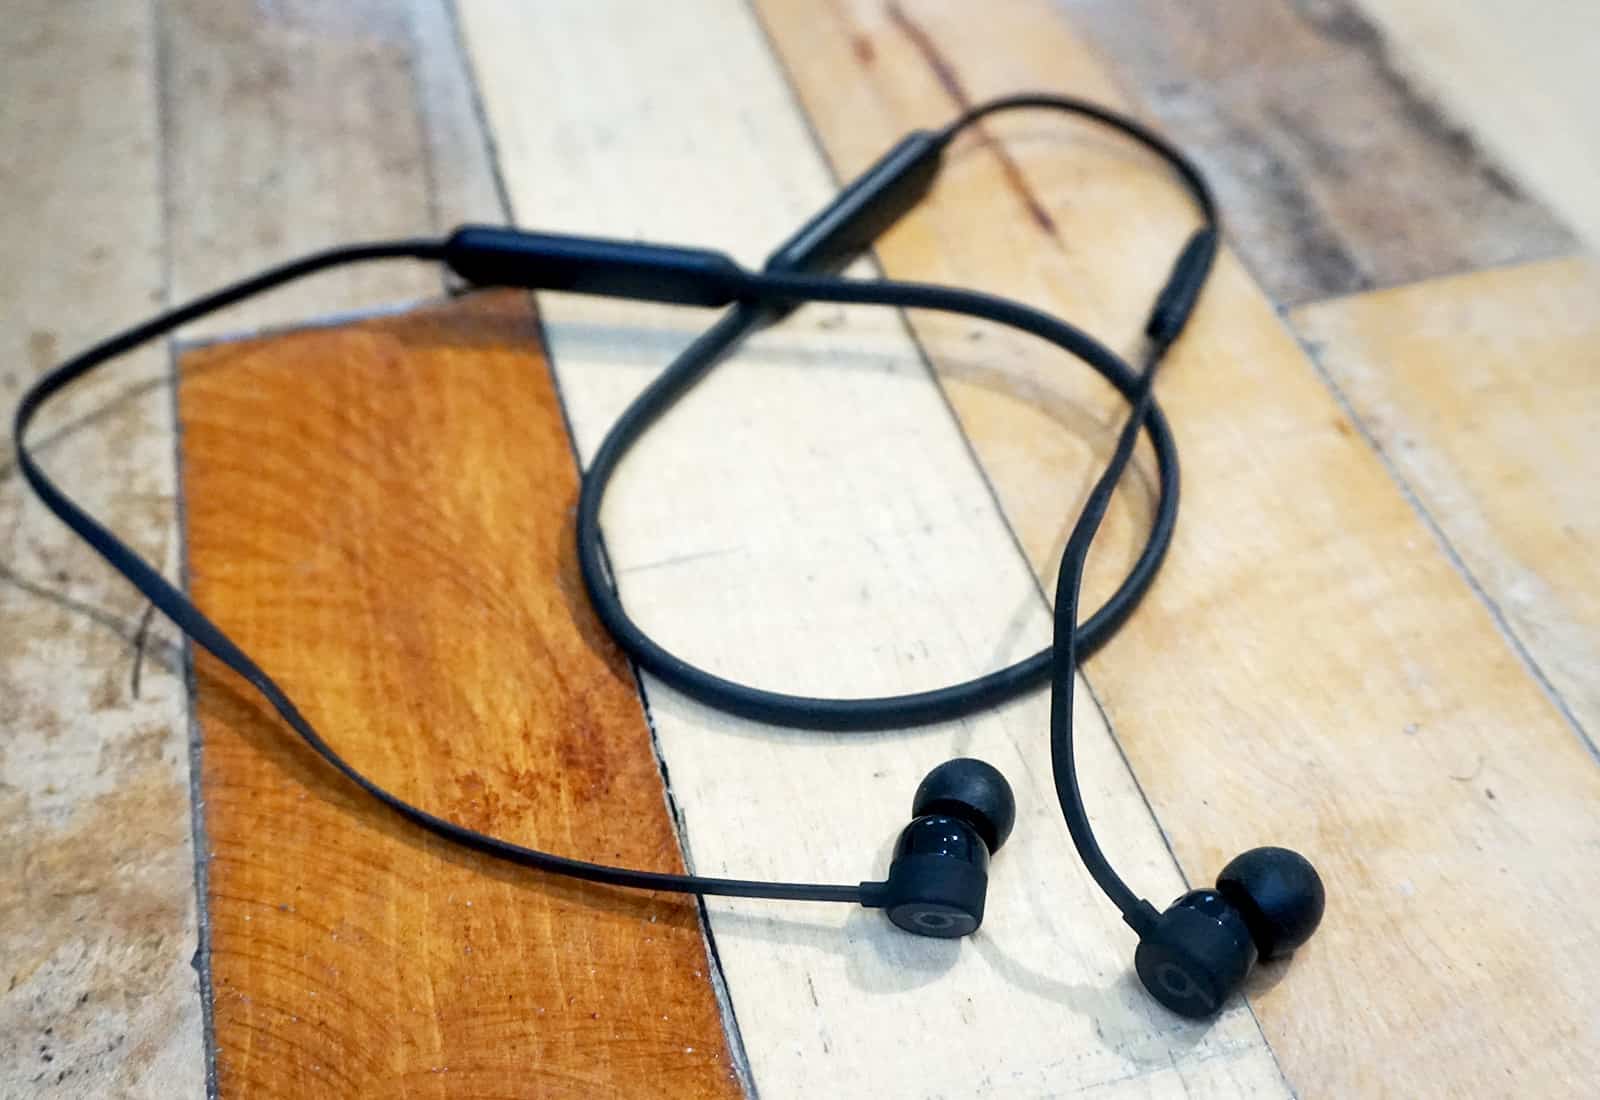 how to connect beats earbuds to iphone